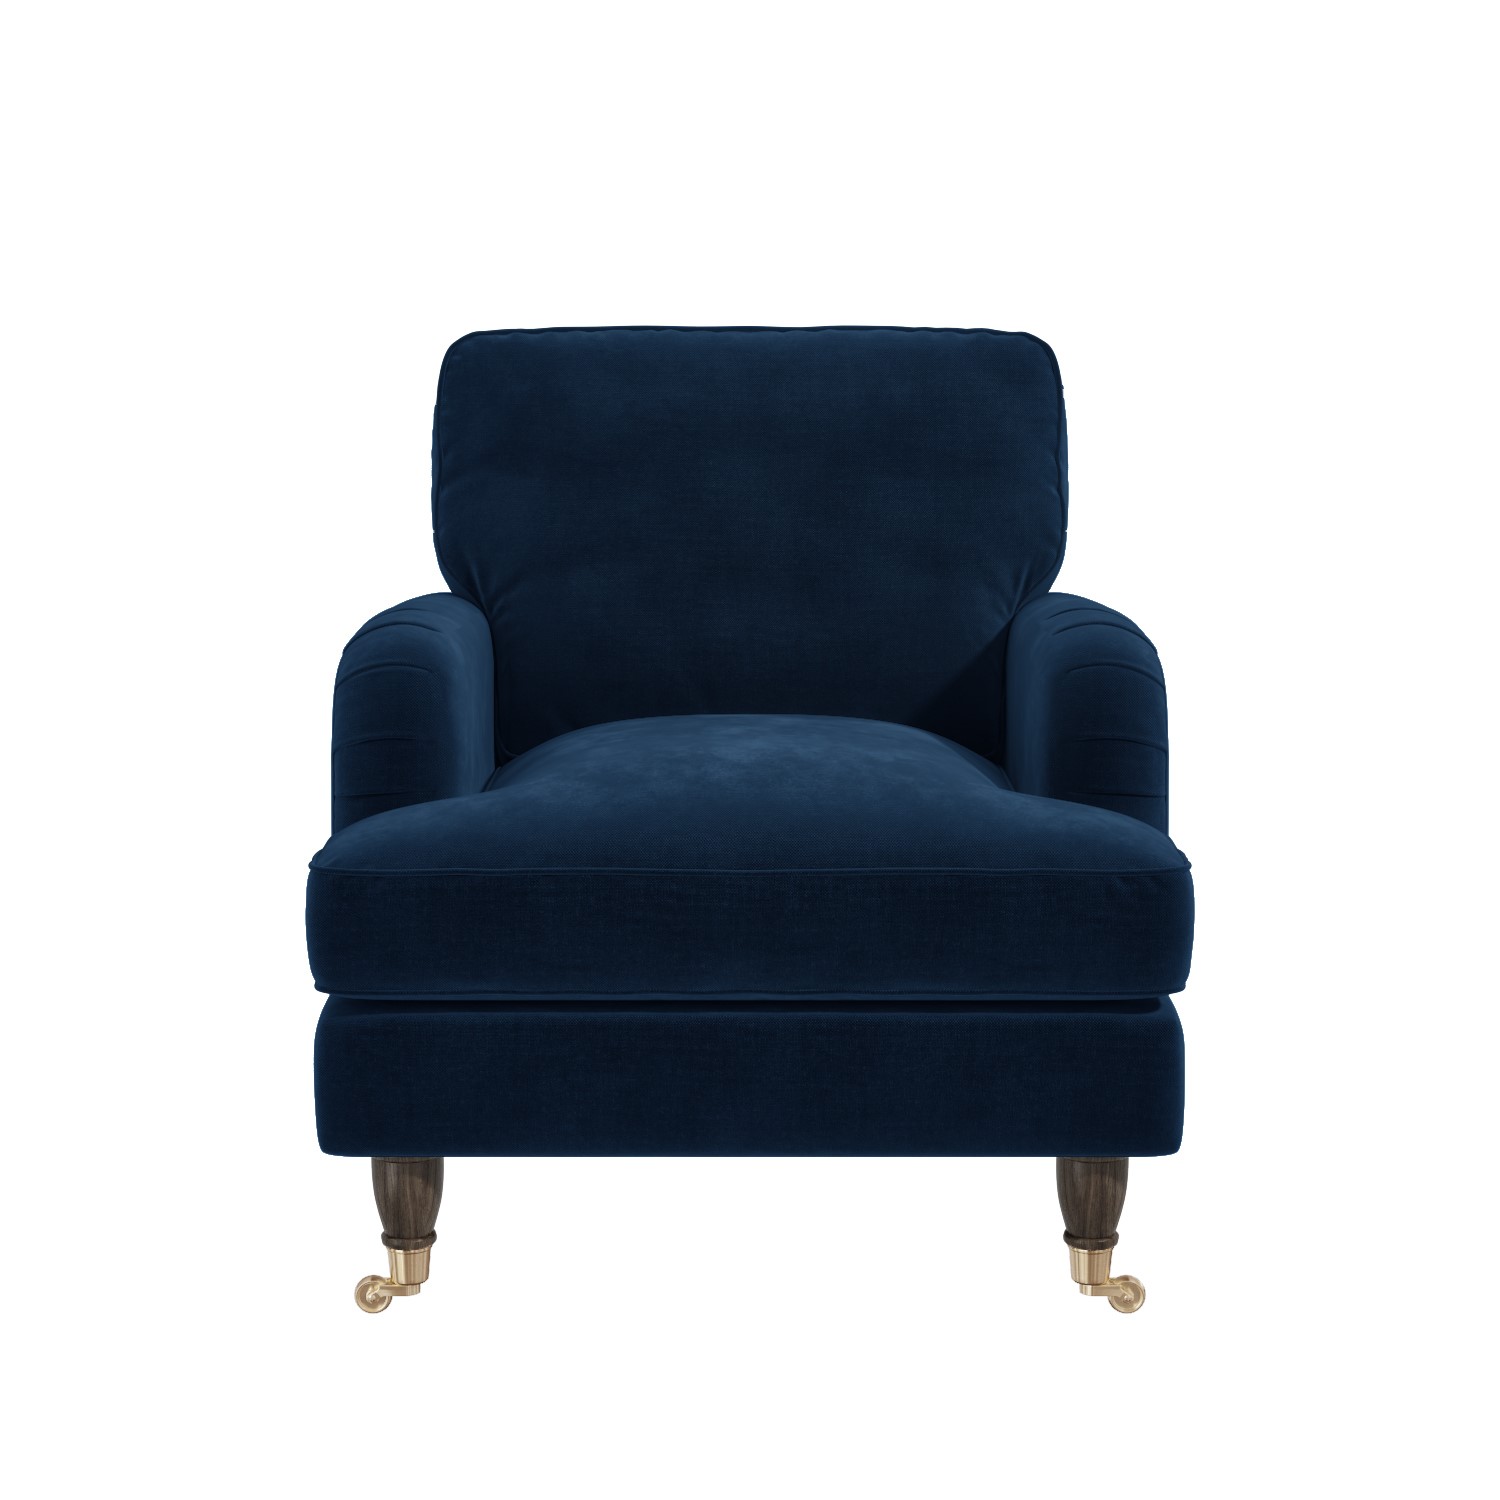 Read more about Navy velvet armchair payton